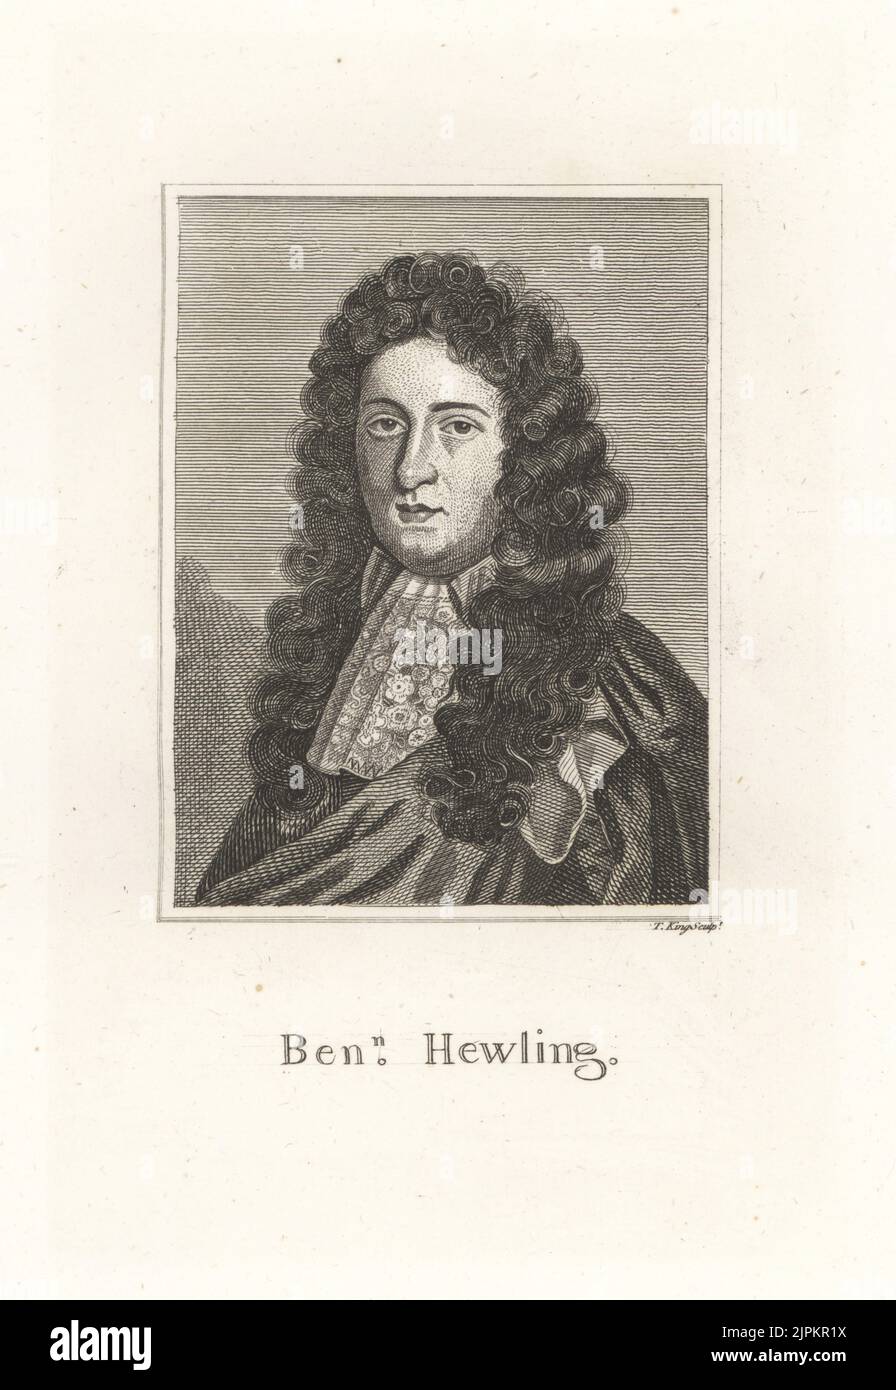 Benjamin Hewling, English soldier executed for participating in the Monmouth Rebellion against King James II, 1663-1685. In luxurious wig, cloak and lace cravat. Copperplate engraving by Thomas King from Samuel Woodburn’s Gallery of Rare Portraits Consisting of Original Plates, George Jones, 102 St Martin’s Lane, London, 1816. Stock Photo